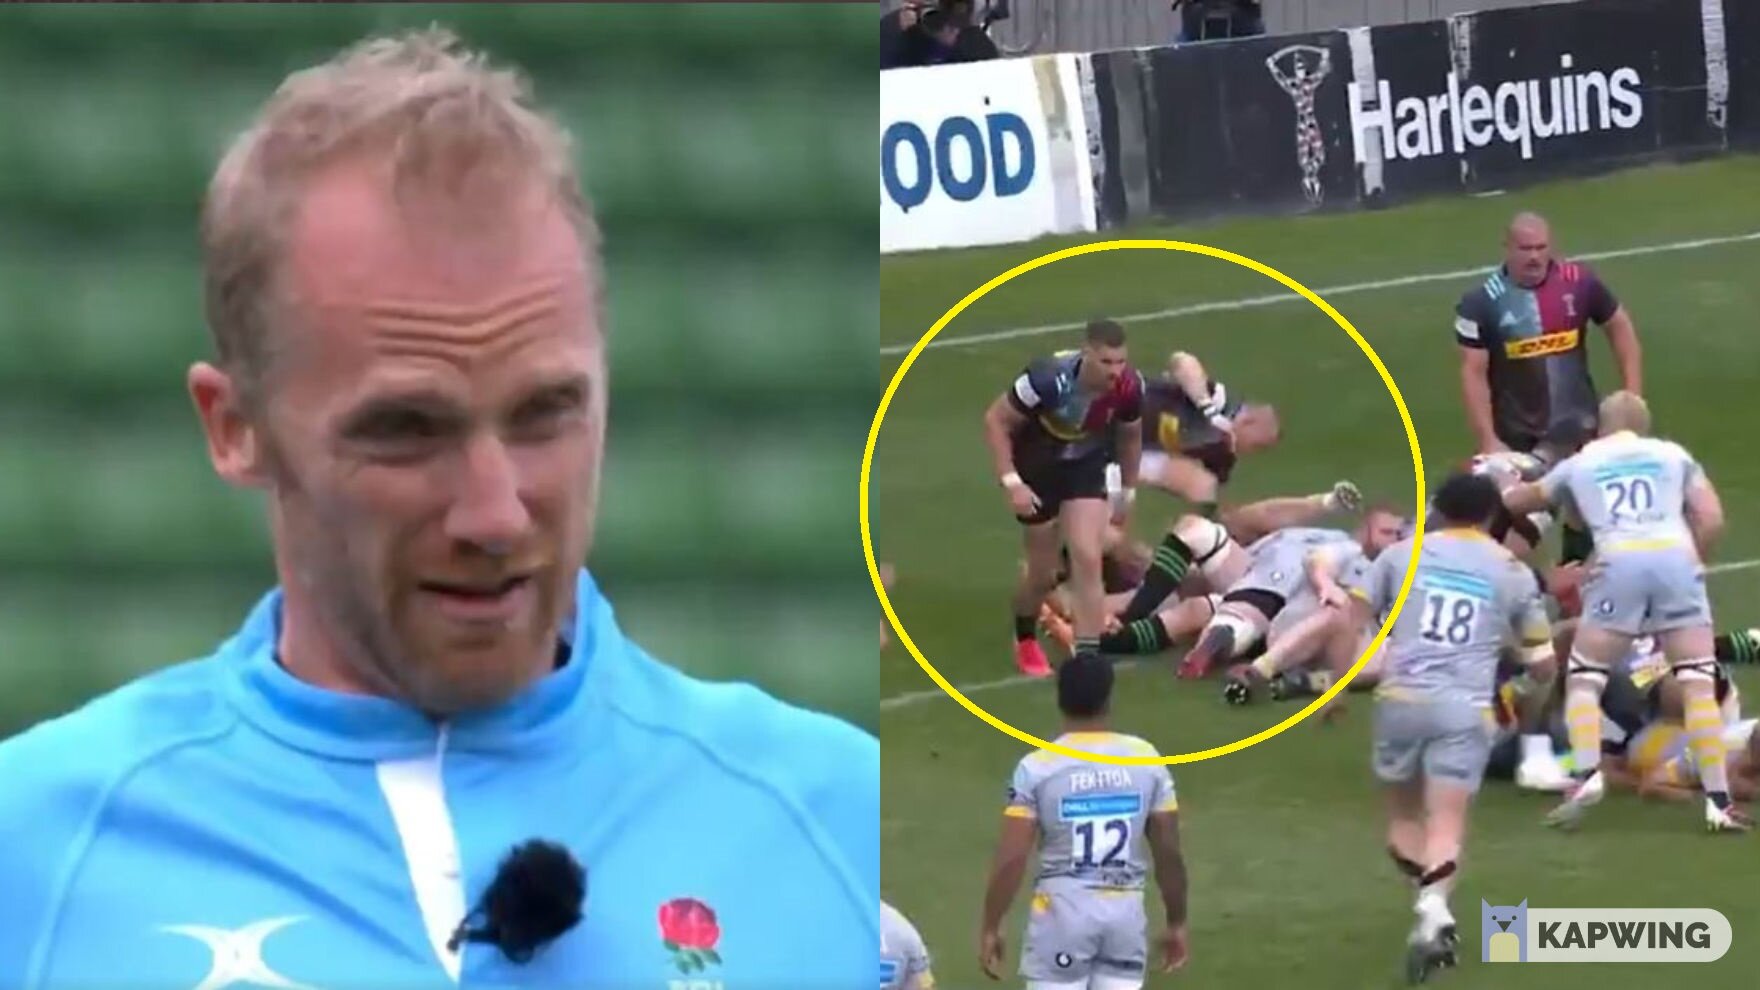 Red card! Shocking face stamp sees Mike Brown sent off